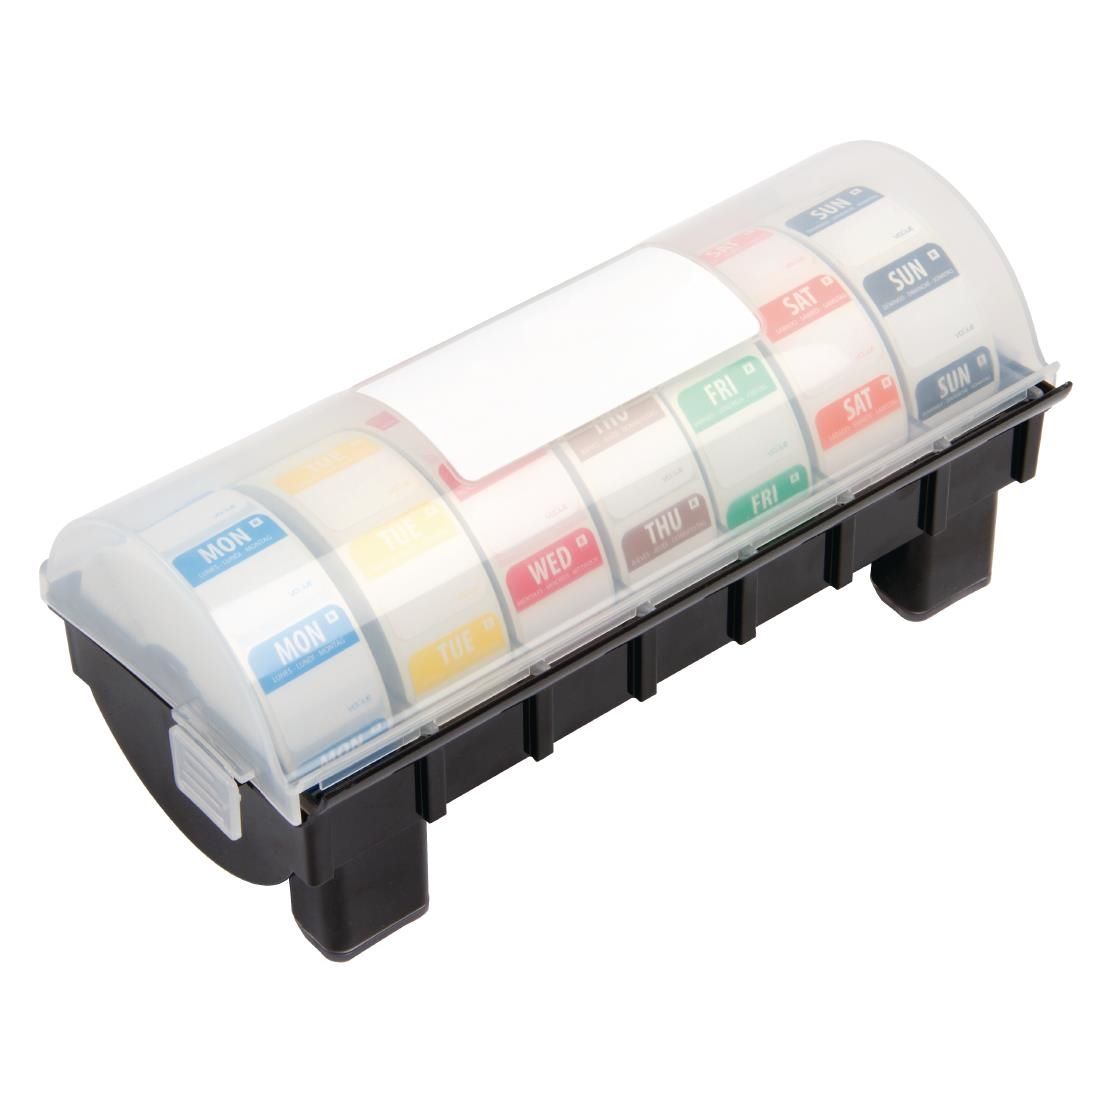 GH473 Vogue Removable Colour Coded Food Labels with 1" Dispenser